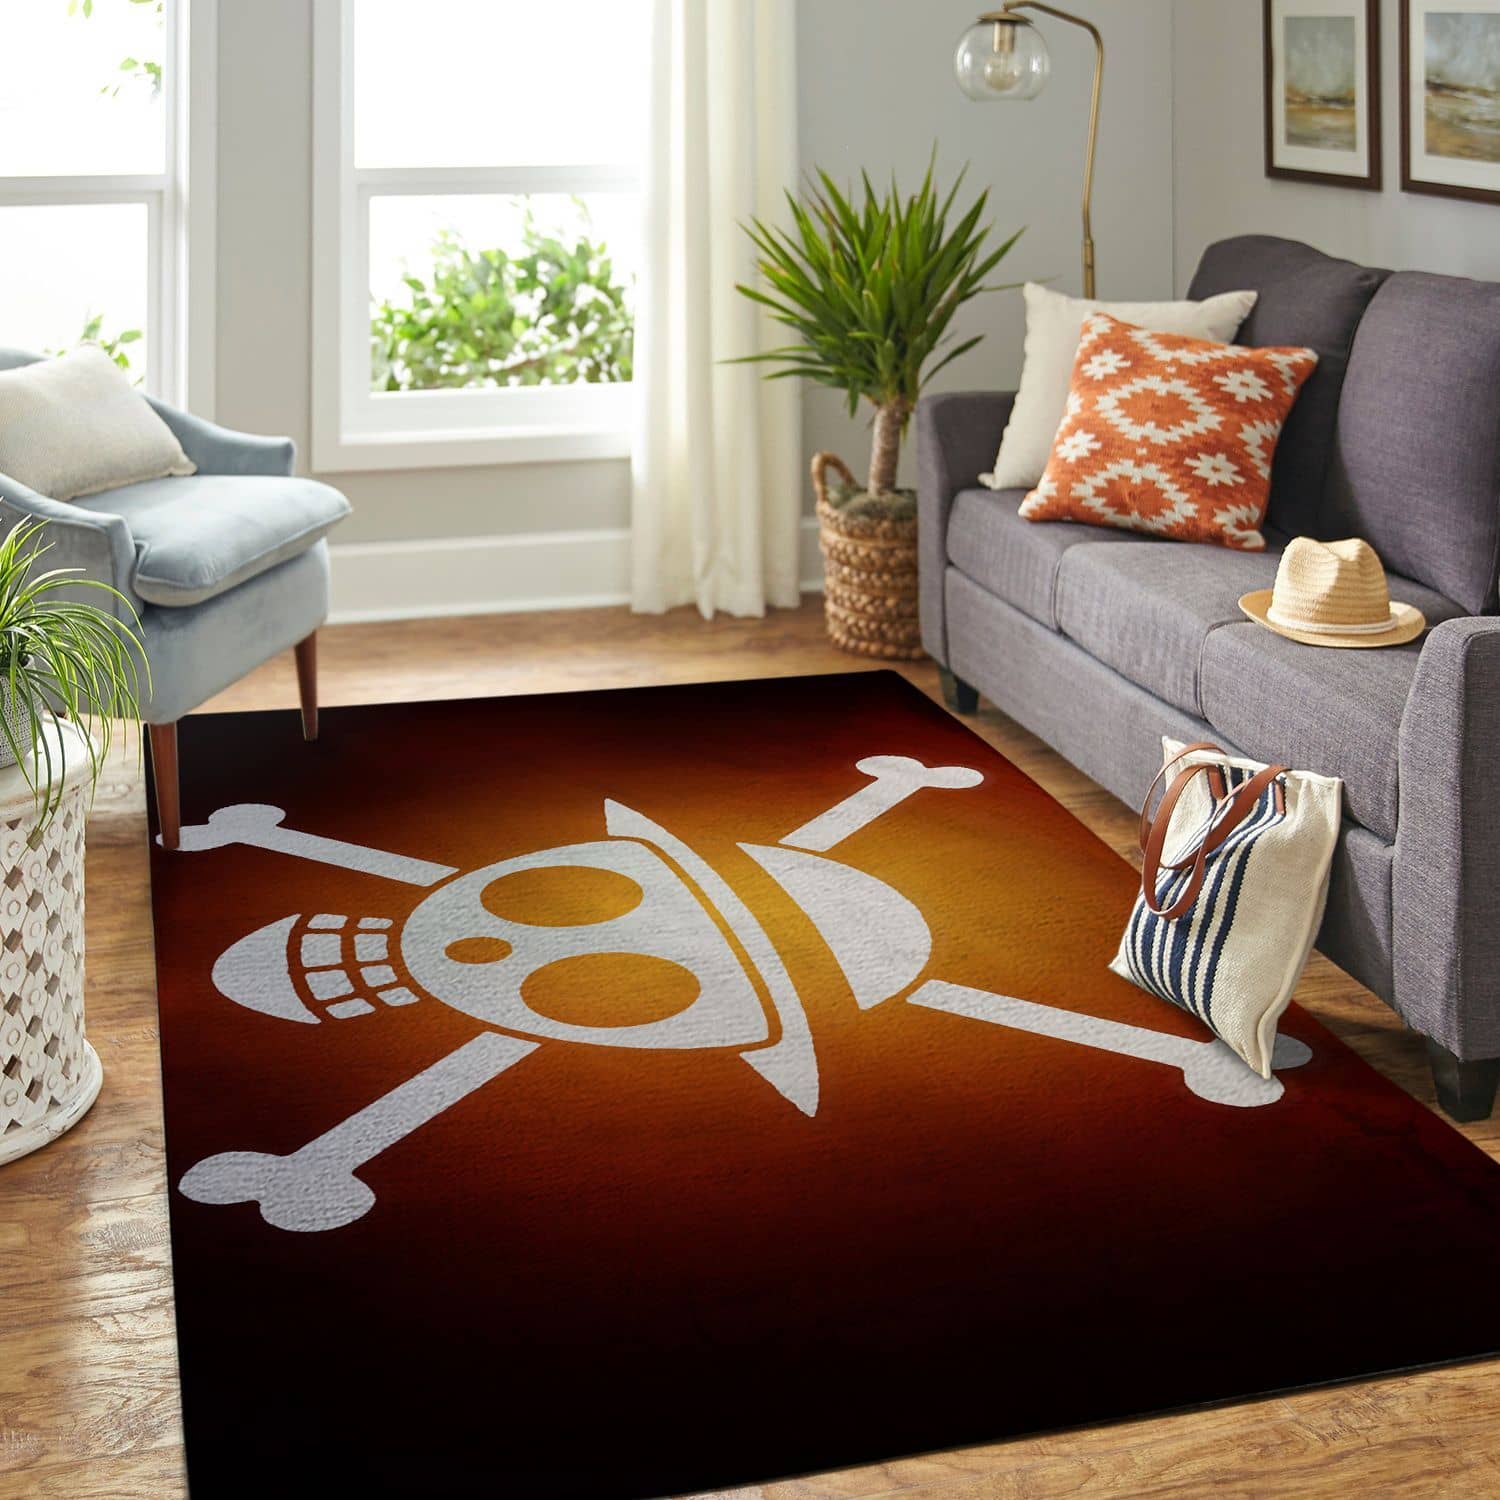 Amazon Onepiece-Luffy Living Room Area No6445 Rug